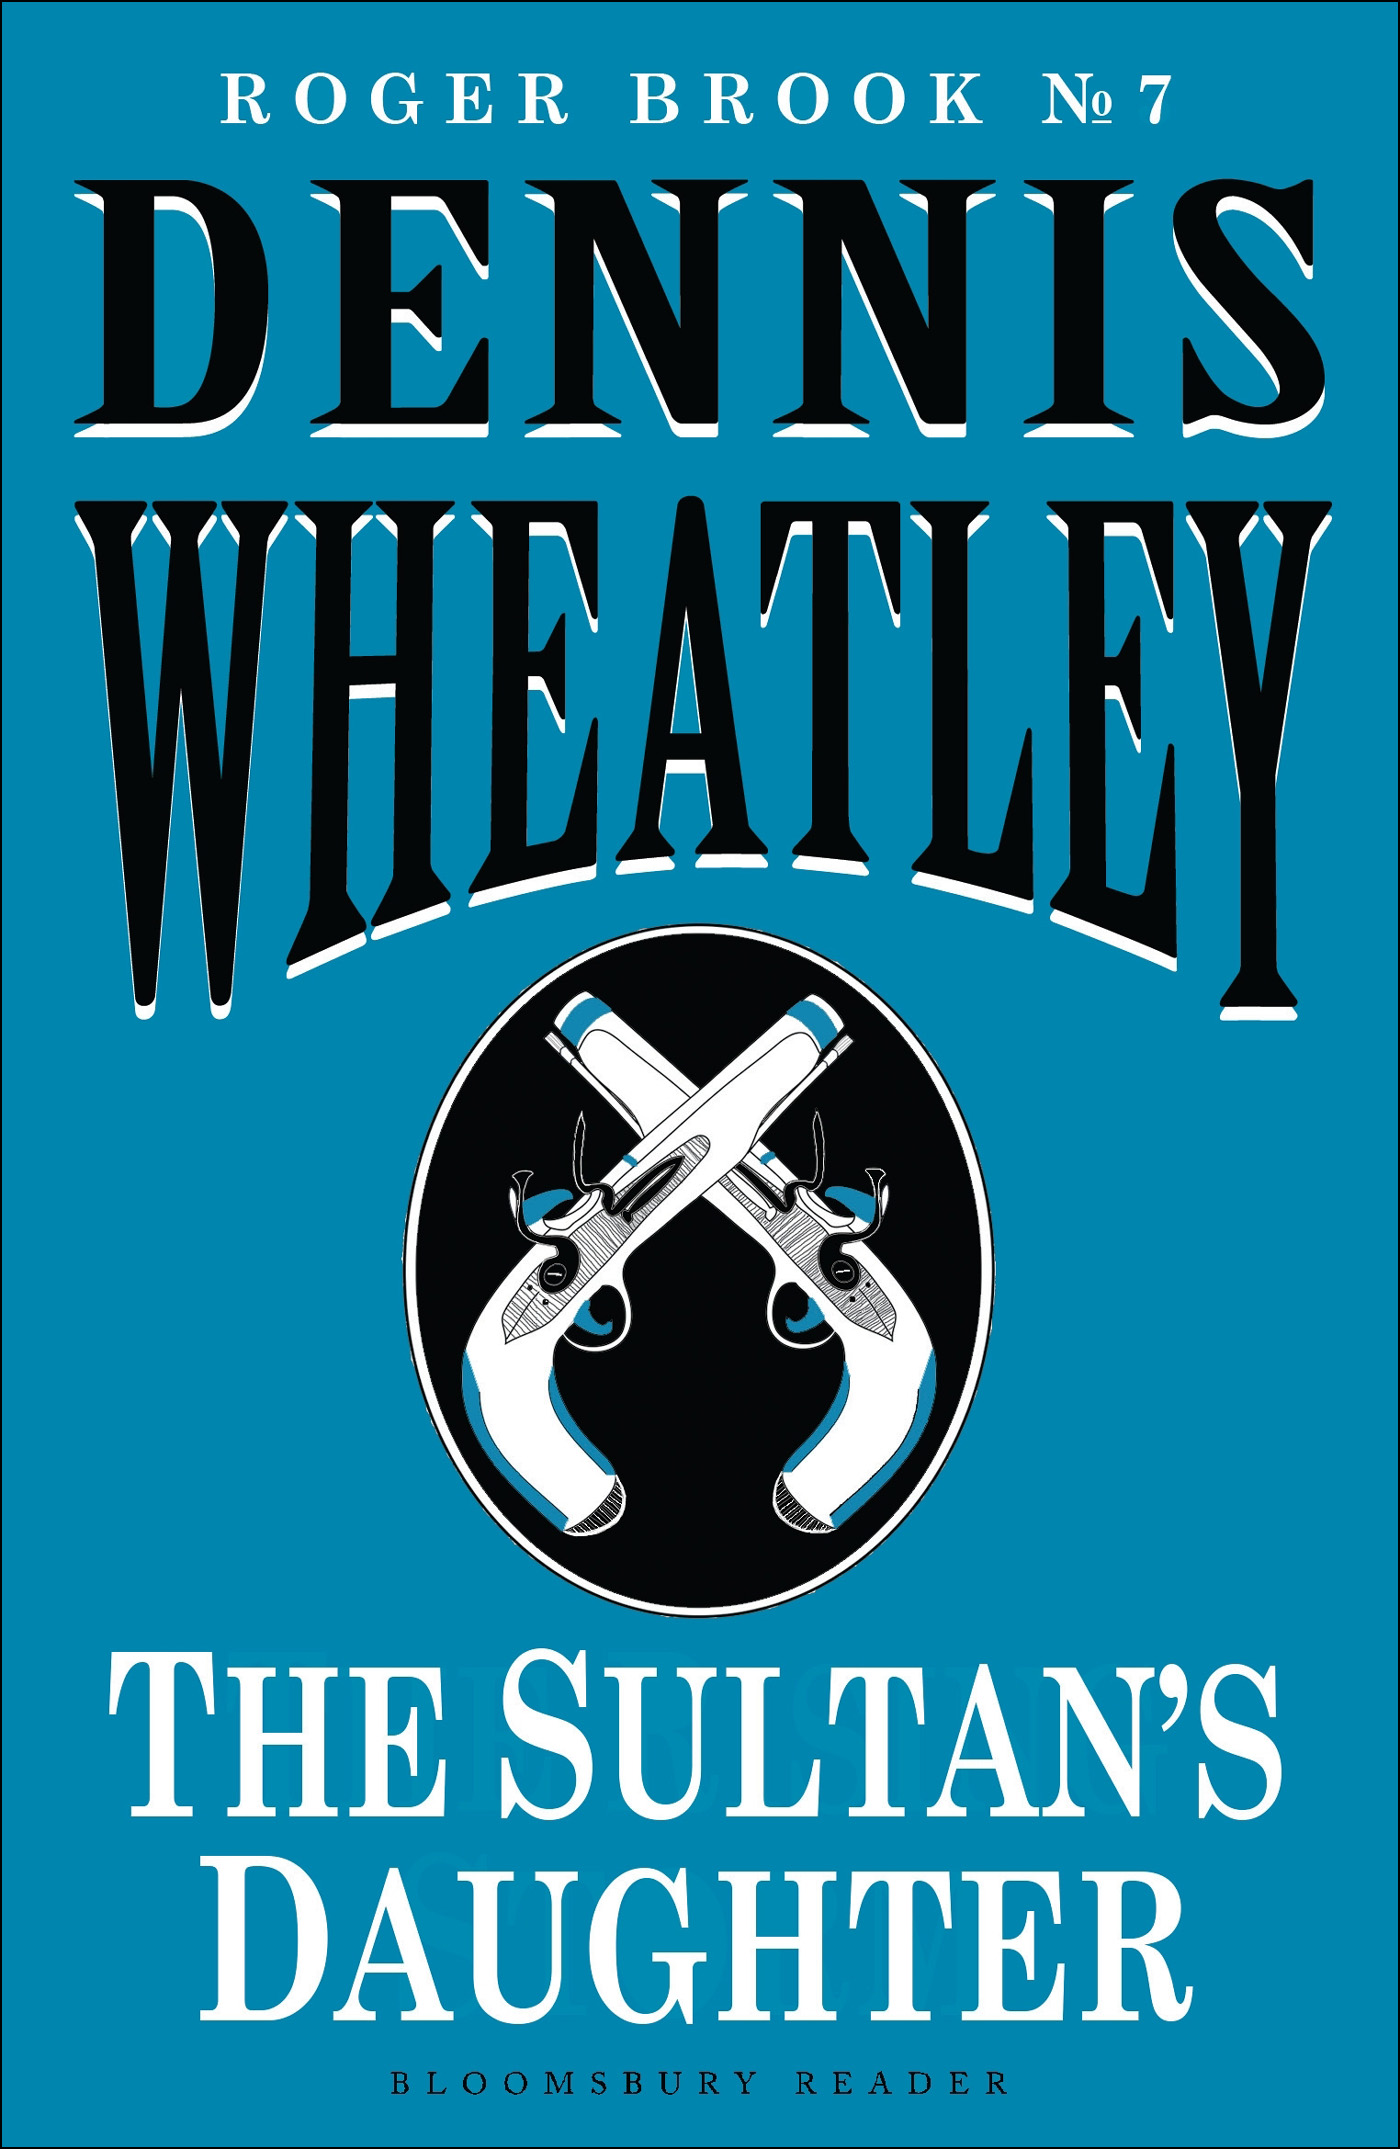 The Sultan's Daughter (2014) by Dennis Wheatley